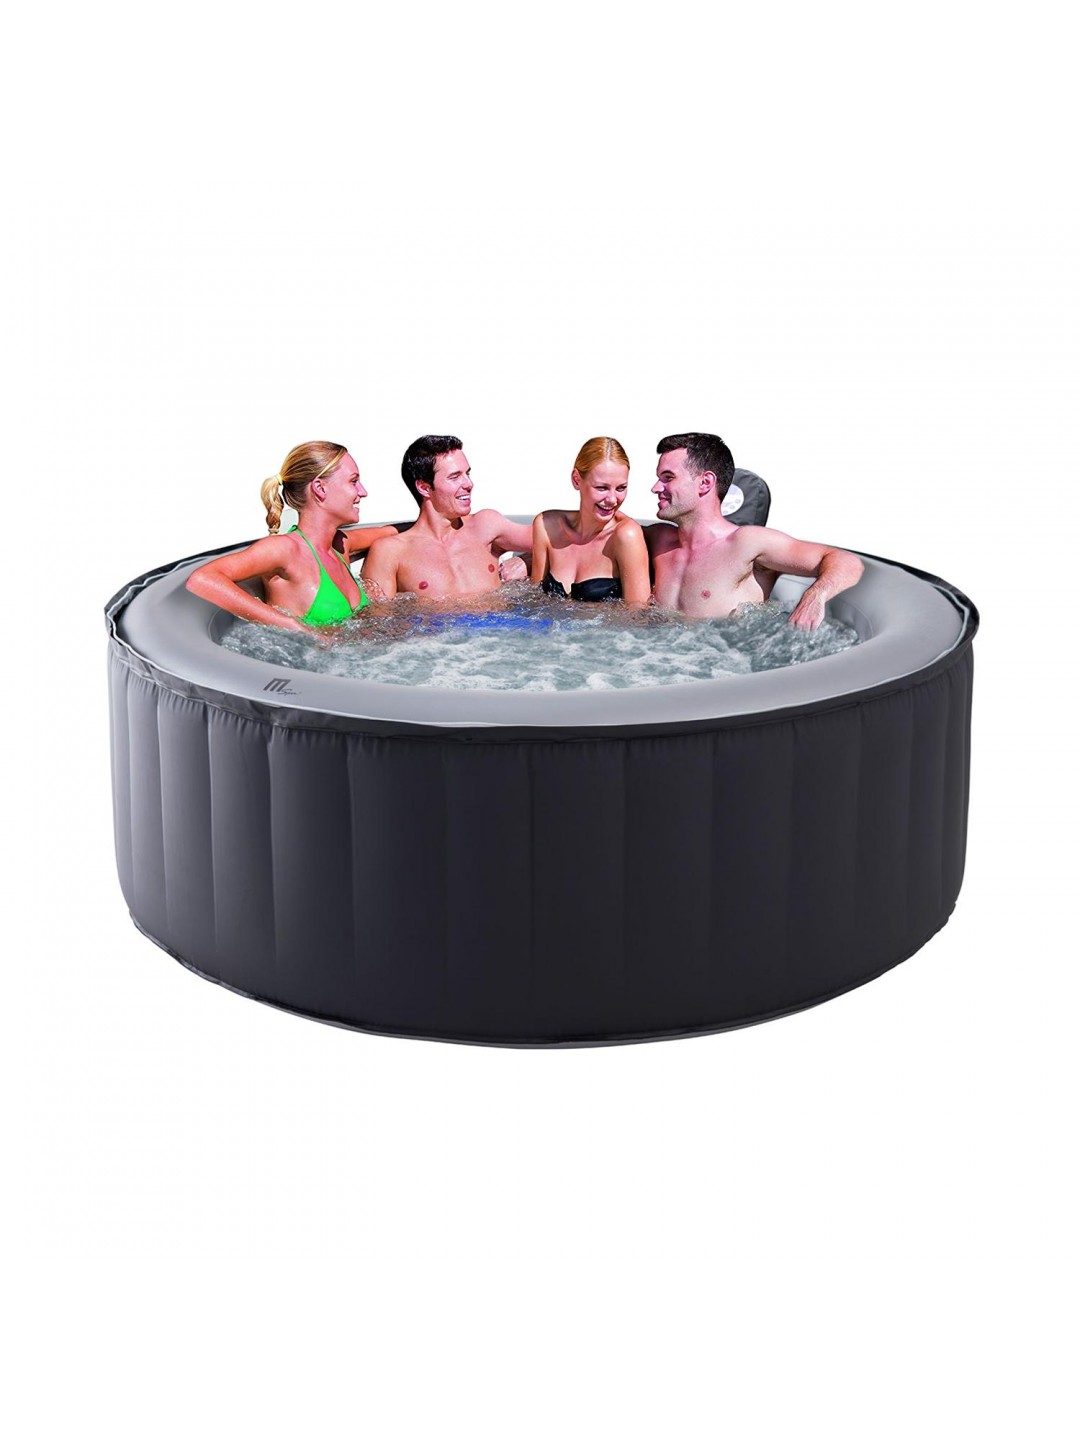 4 Or 6 Bathers Mspa Silver Cloud Inflatable Hot Tub Portable Spa Accessories 